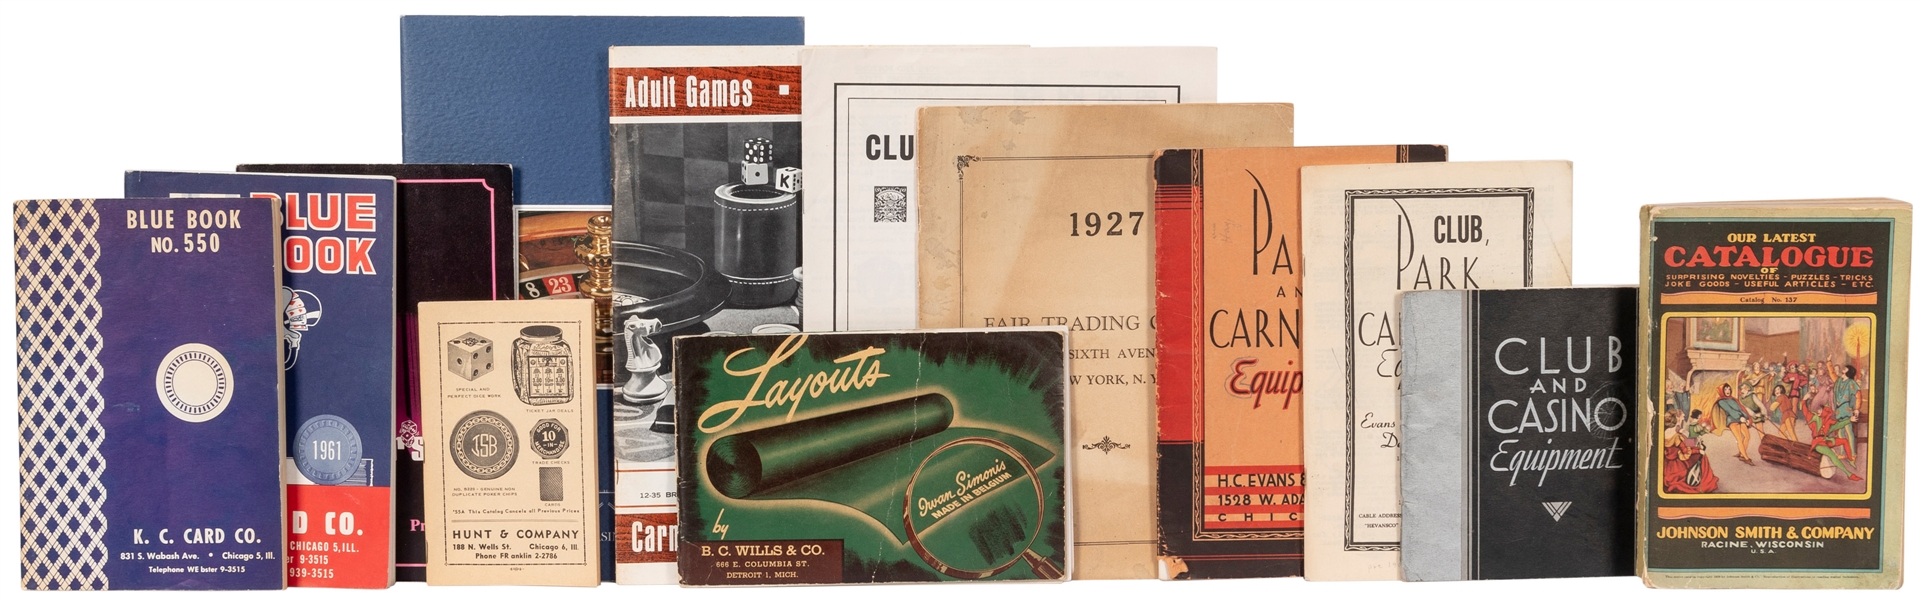 [CATALOGS]. A large group of game and gambling catalogs. Ap...